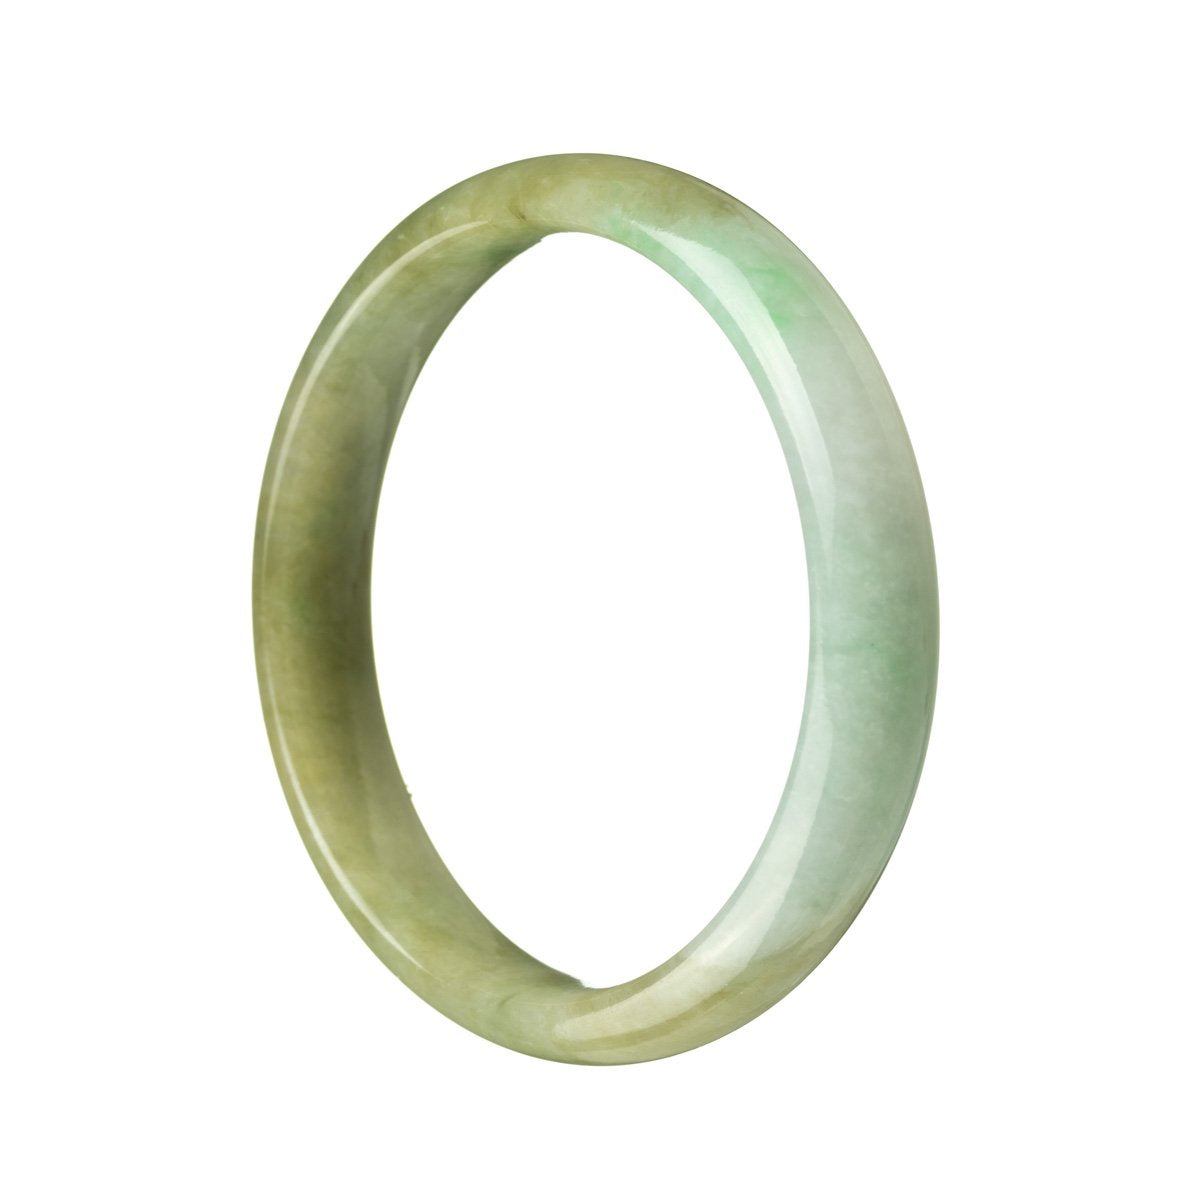 A half moon-shaped real grade A green traditional jade bangle in a beautiful brownish green color. Perfect for adding a touch of elegance and style to any outfit.